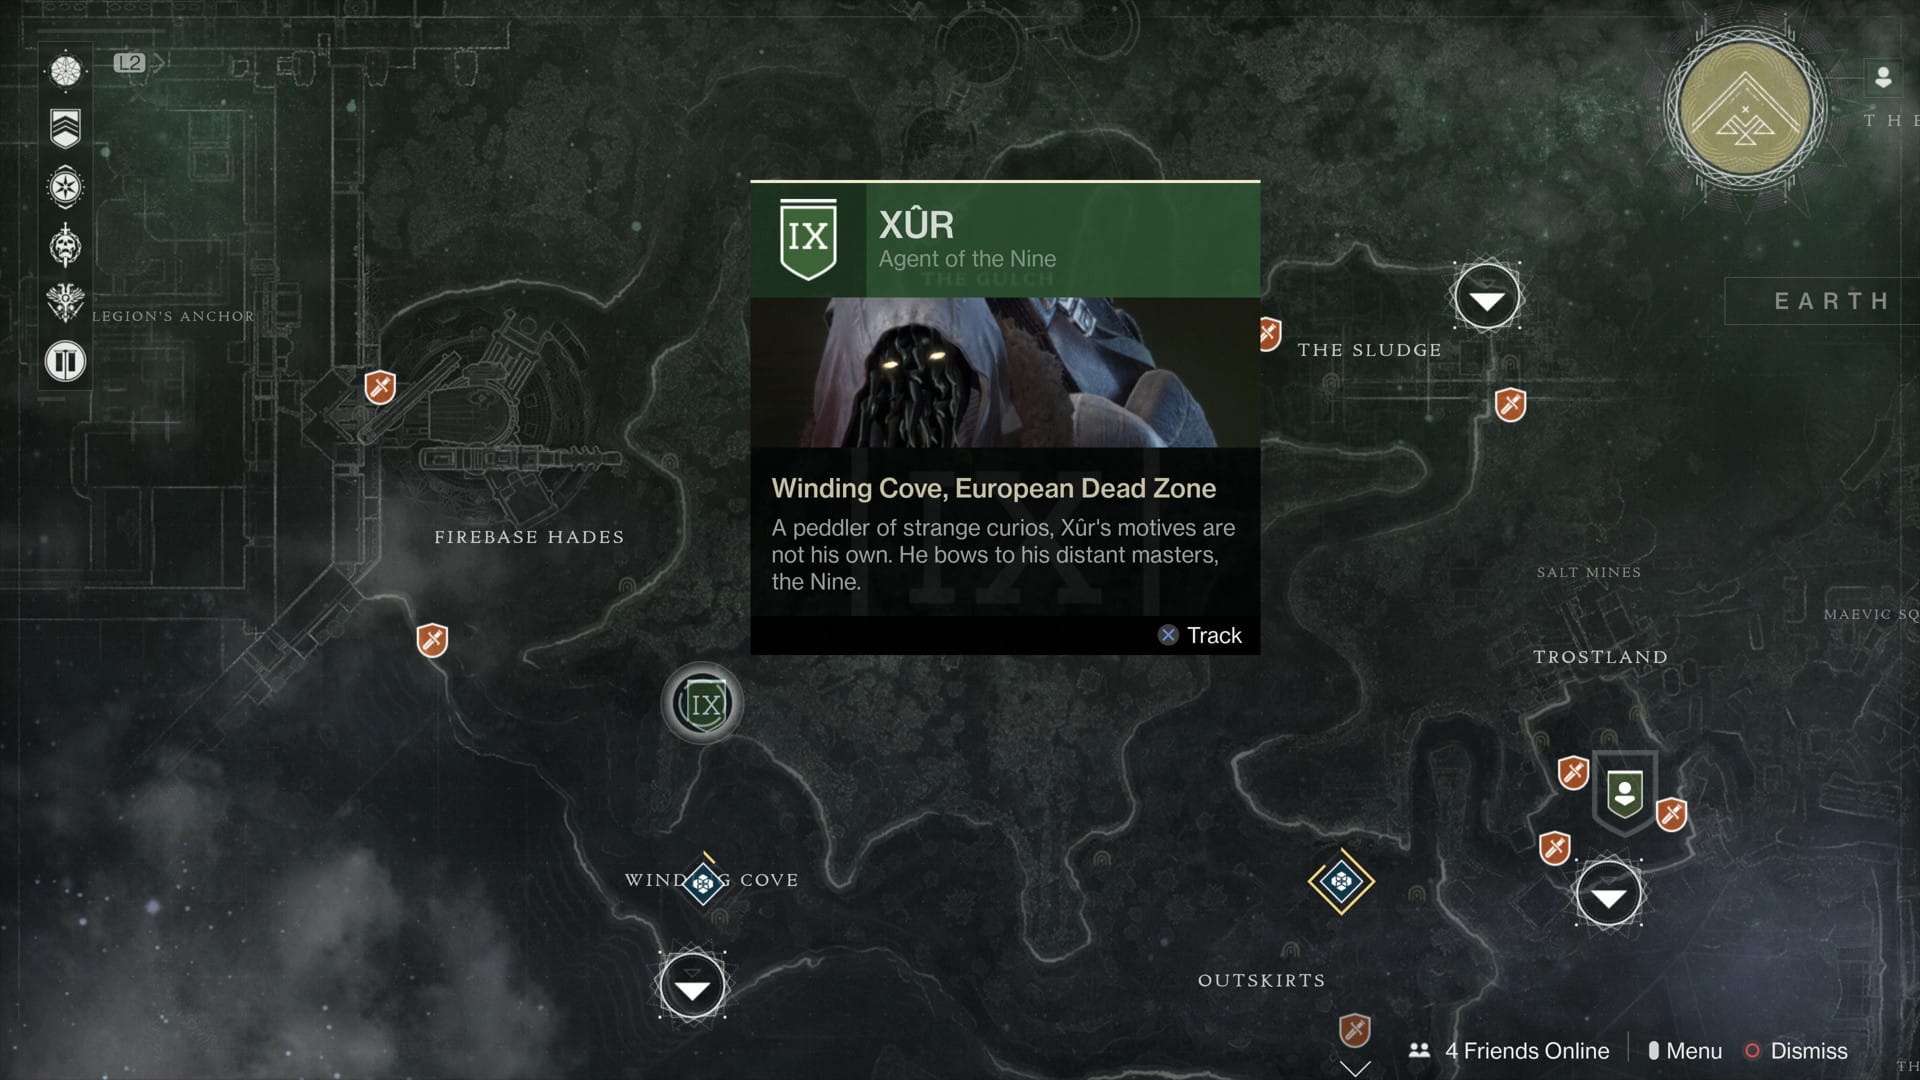 Where to find Xur in Destiny 2 this week (Sept 23-27)